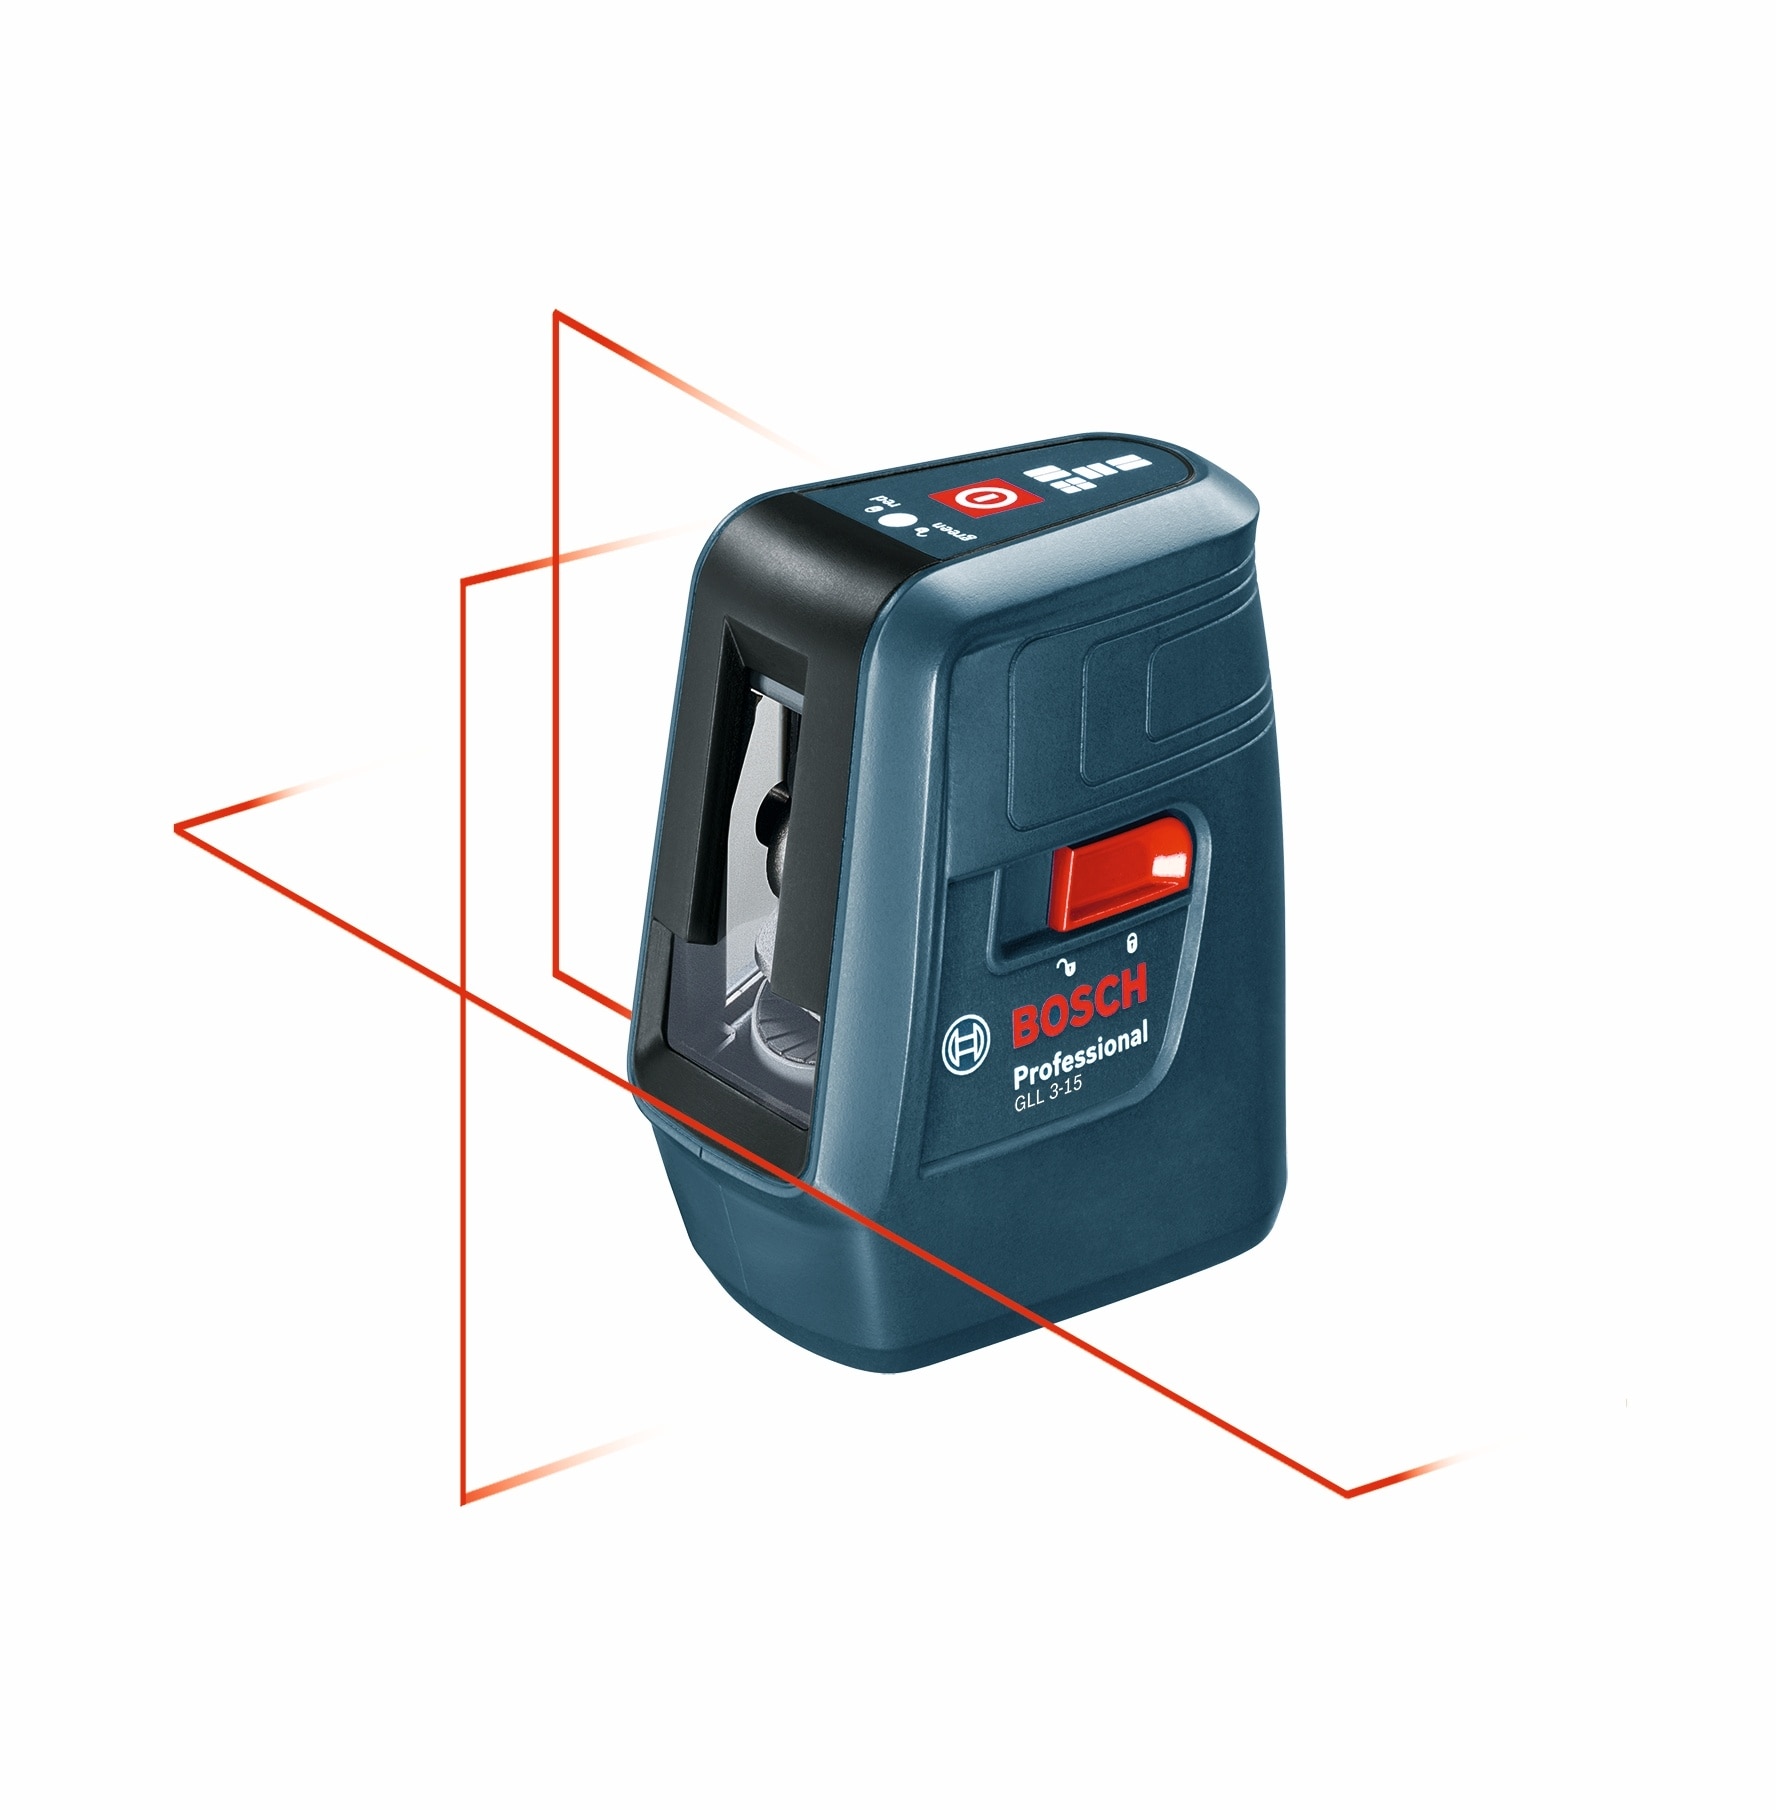 legal navegación Tener un picnic Bosch Red 50-ft Self-Leveling Indoor Line Generator Laser Level with Line  Beam in the Laser Levels department at Lowes.com